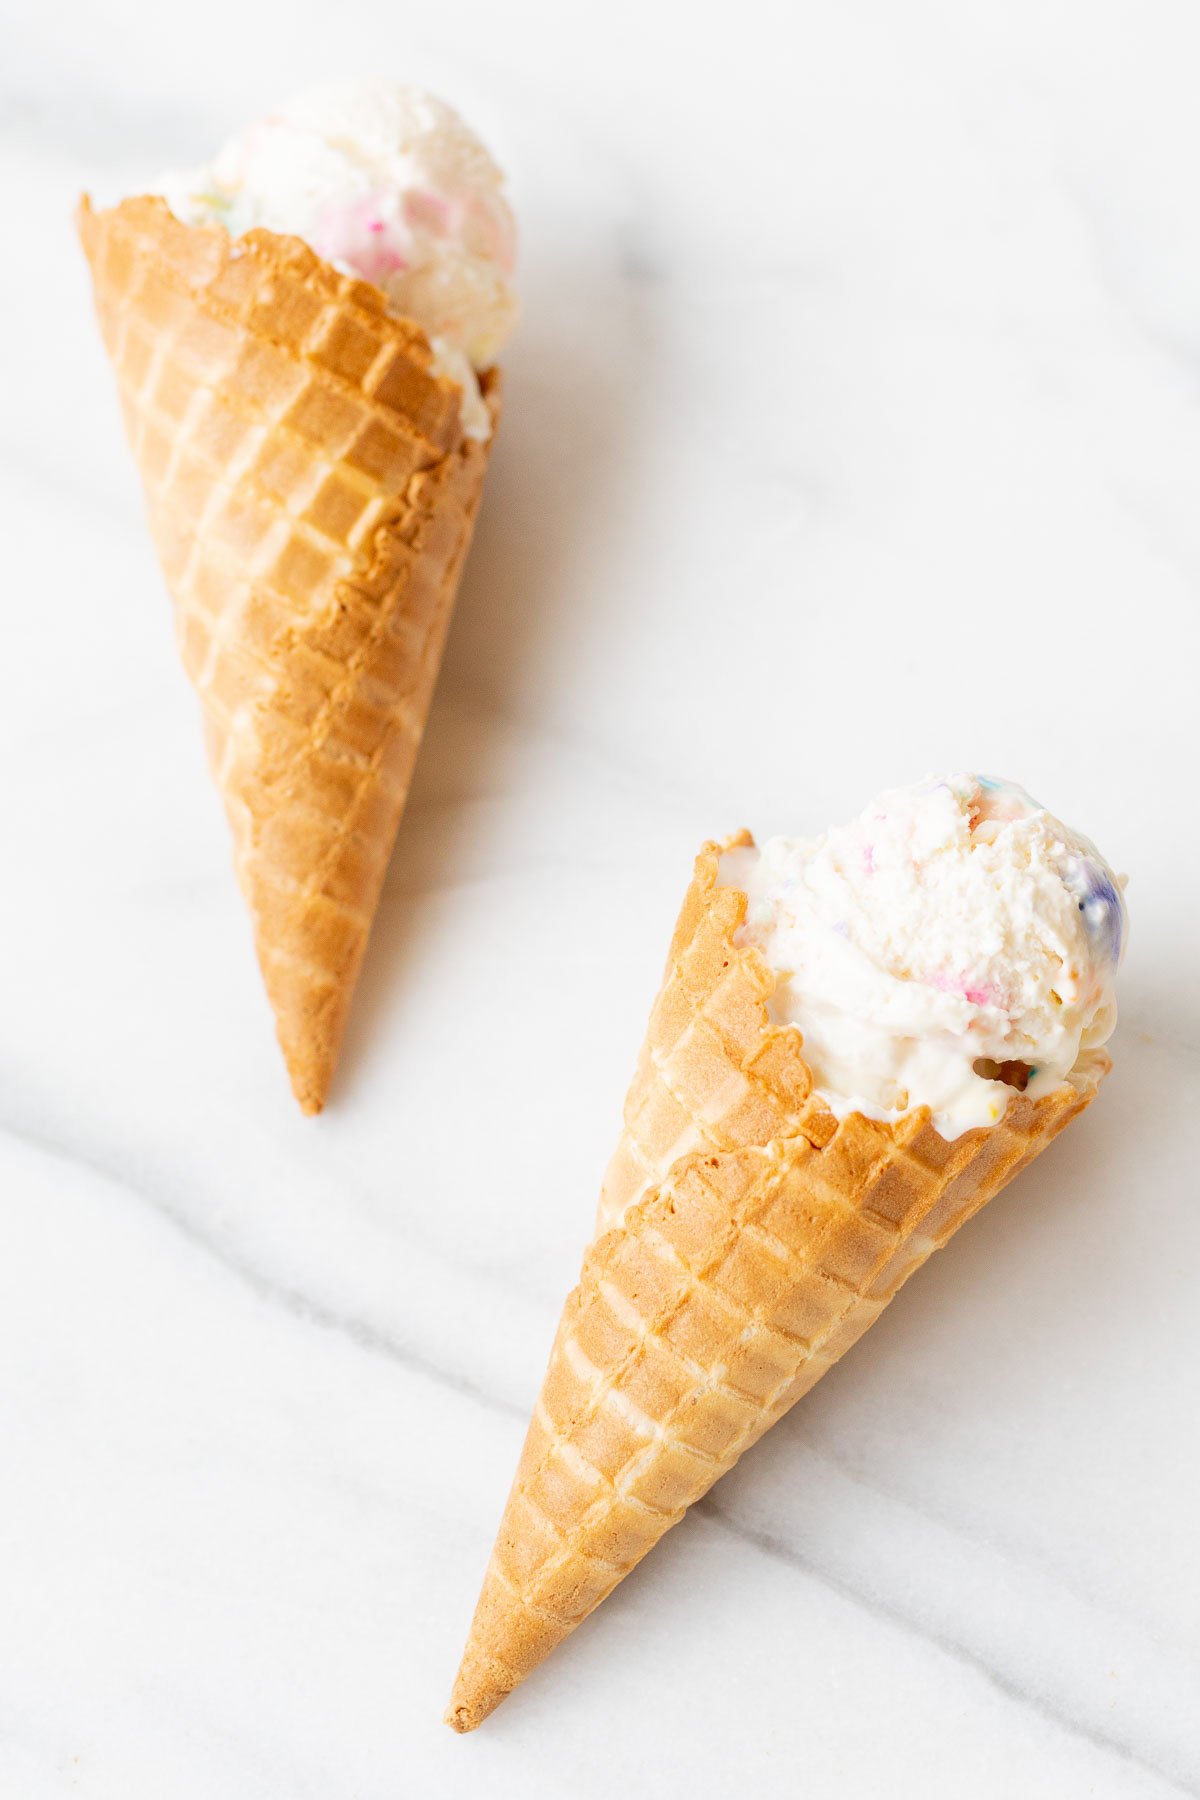 Two waffle ice cream cones with scoops of colorful bubble gum ice cream, placed on a marble surface.